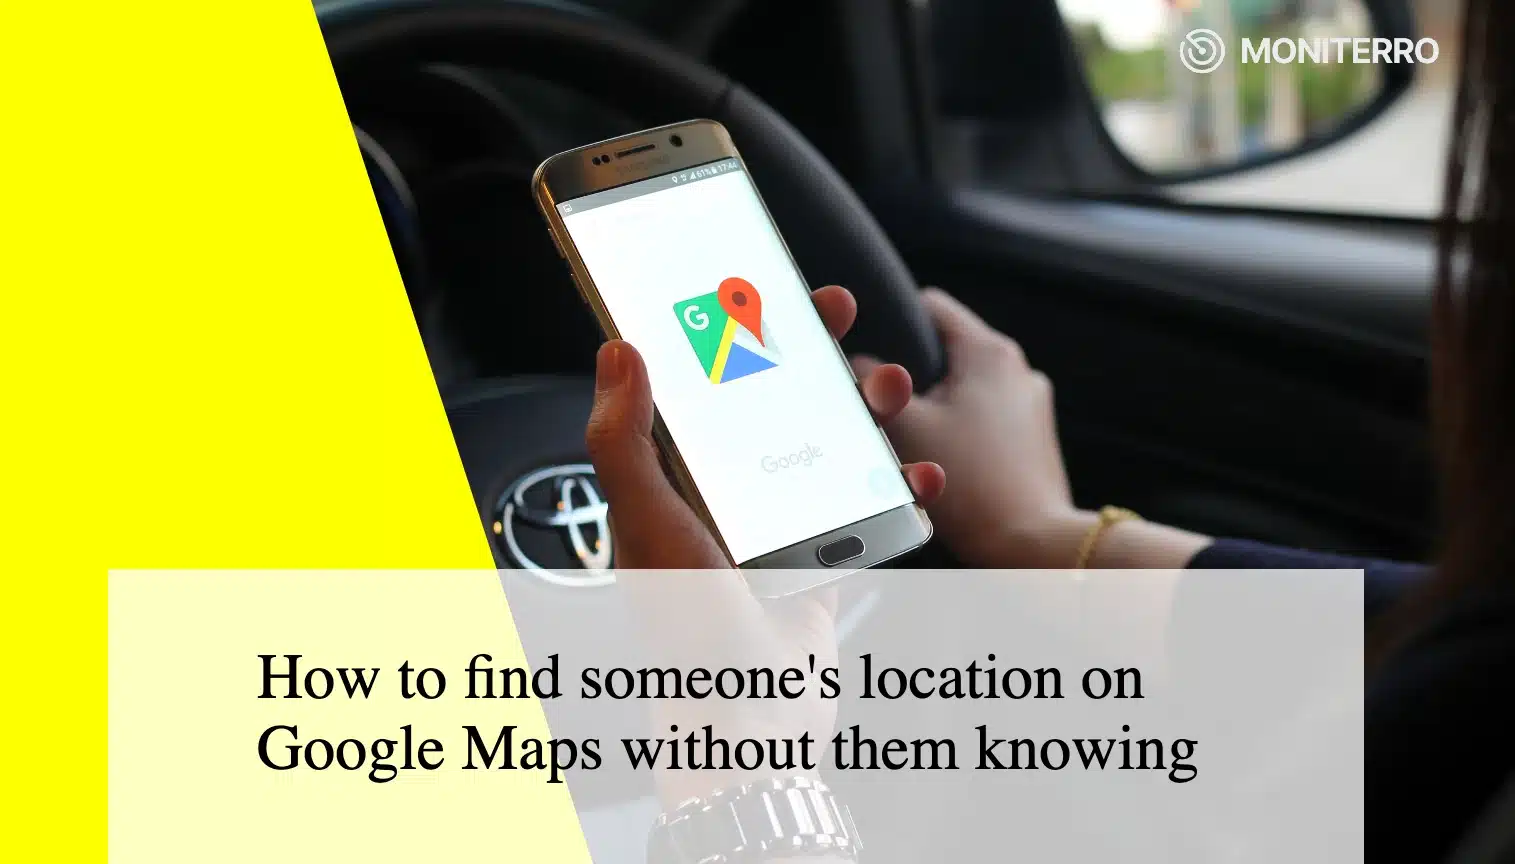 How to find someone's location on Google Maps without them knowing